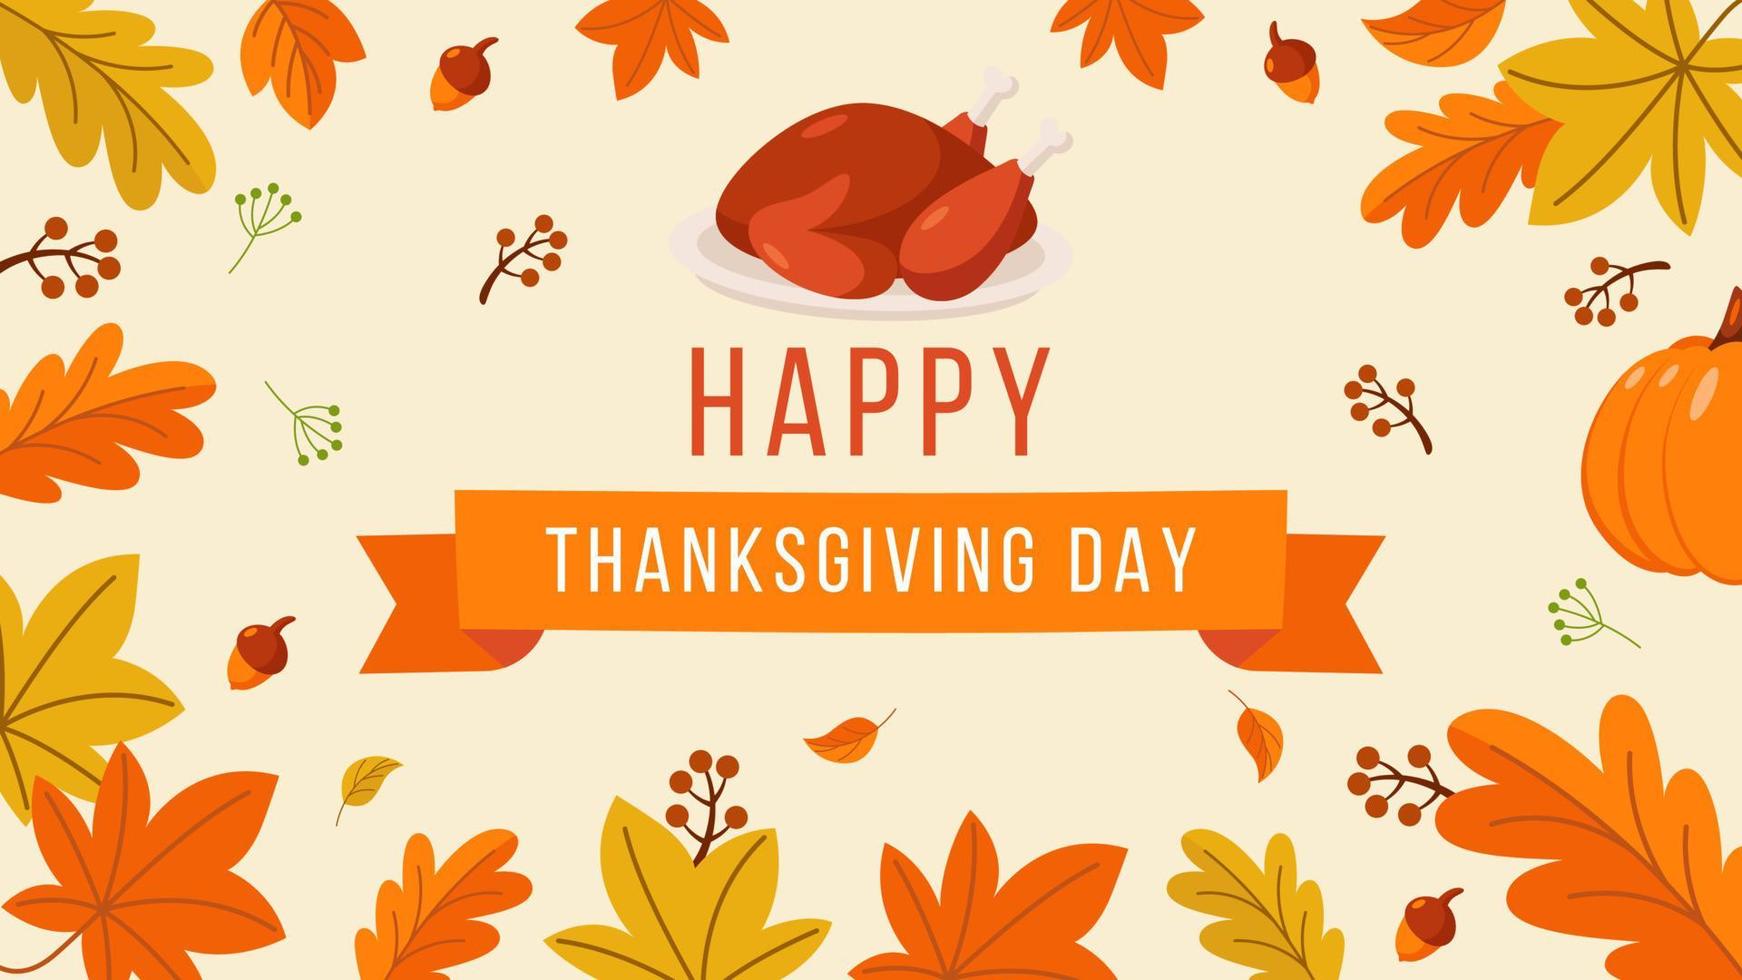 concept of thanksgiving day background in flat style design illustration vector